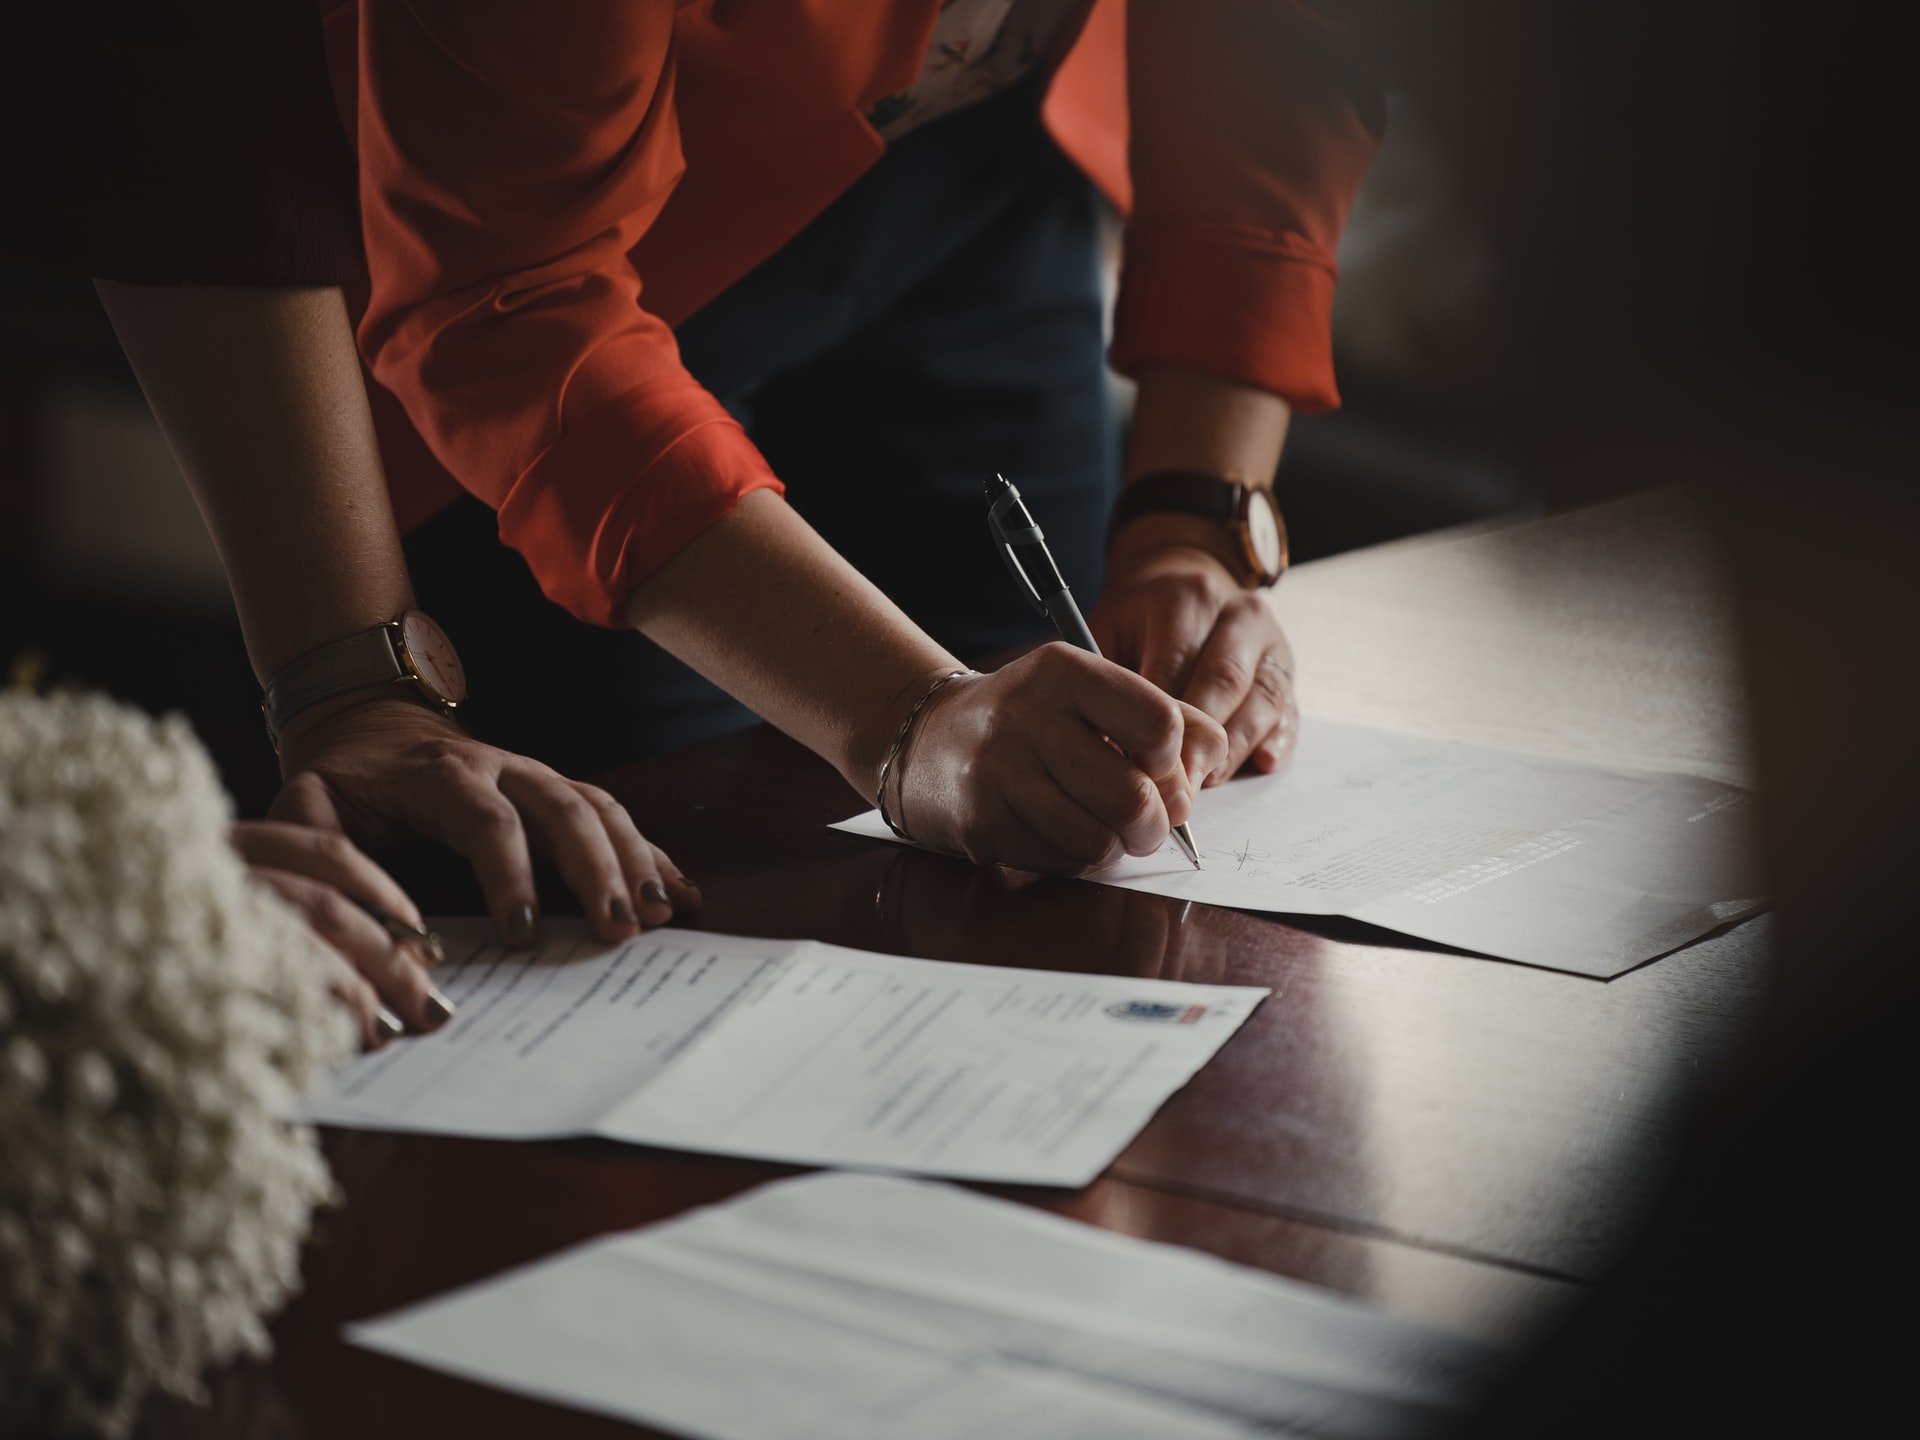 Close-up of man and woman signing papers. | Source: Unsplash